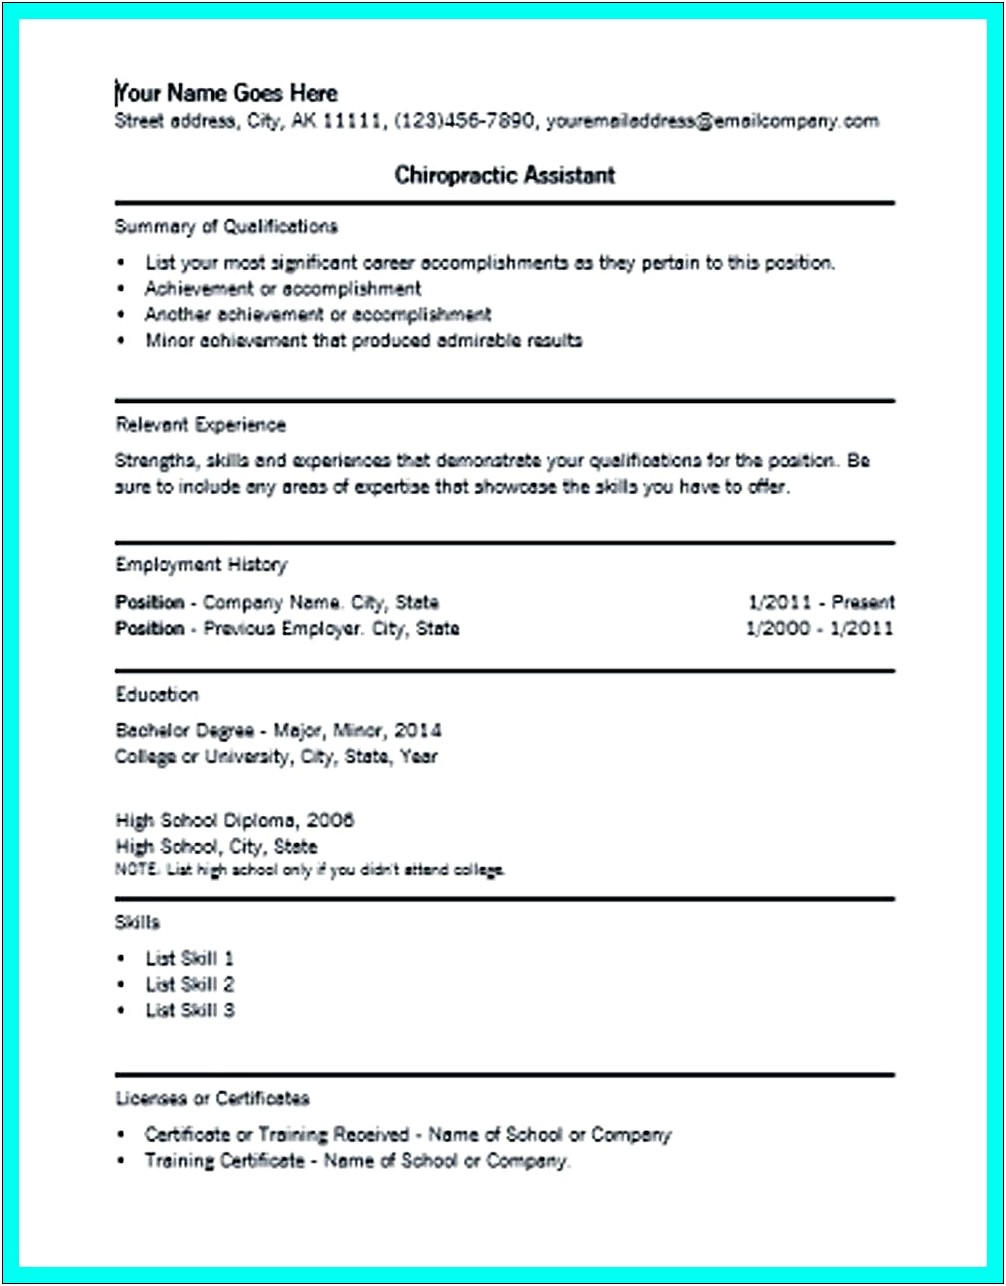 Resume Objective Examples For Chiropractic Receptionist